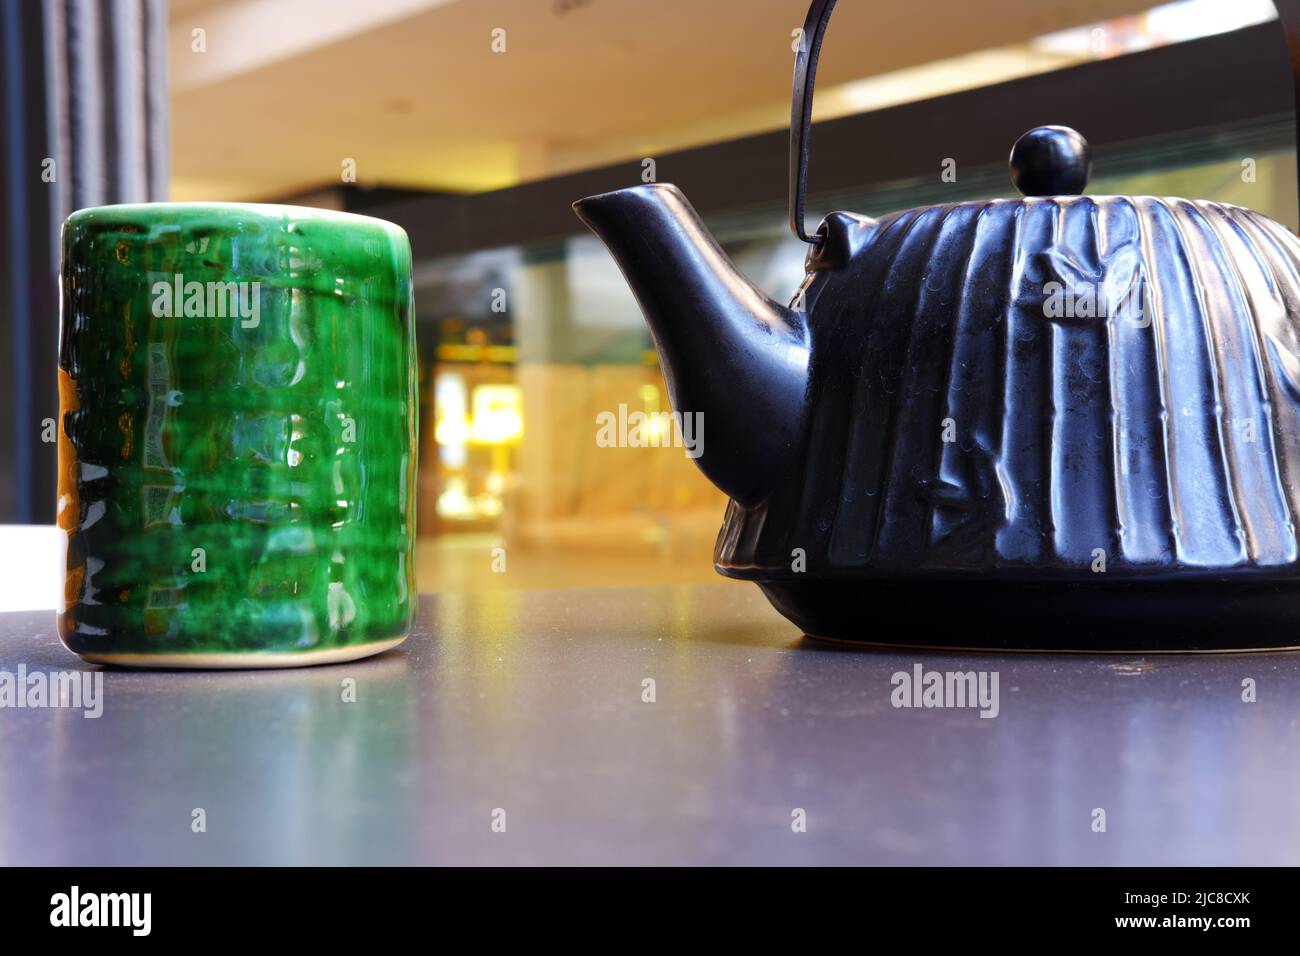 Chinese style vintage ceramic green tea mug and teapot on table Stock Photo